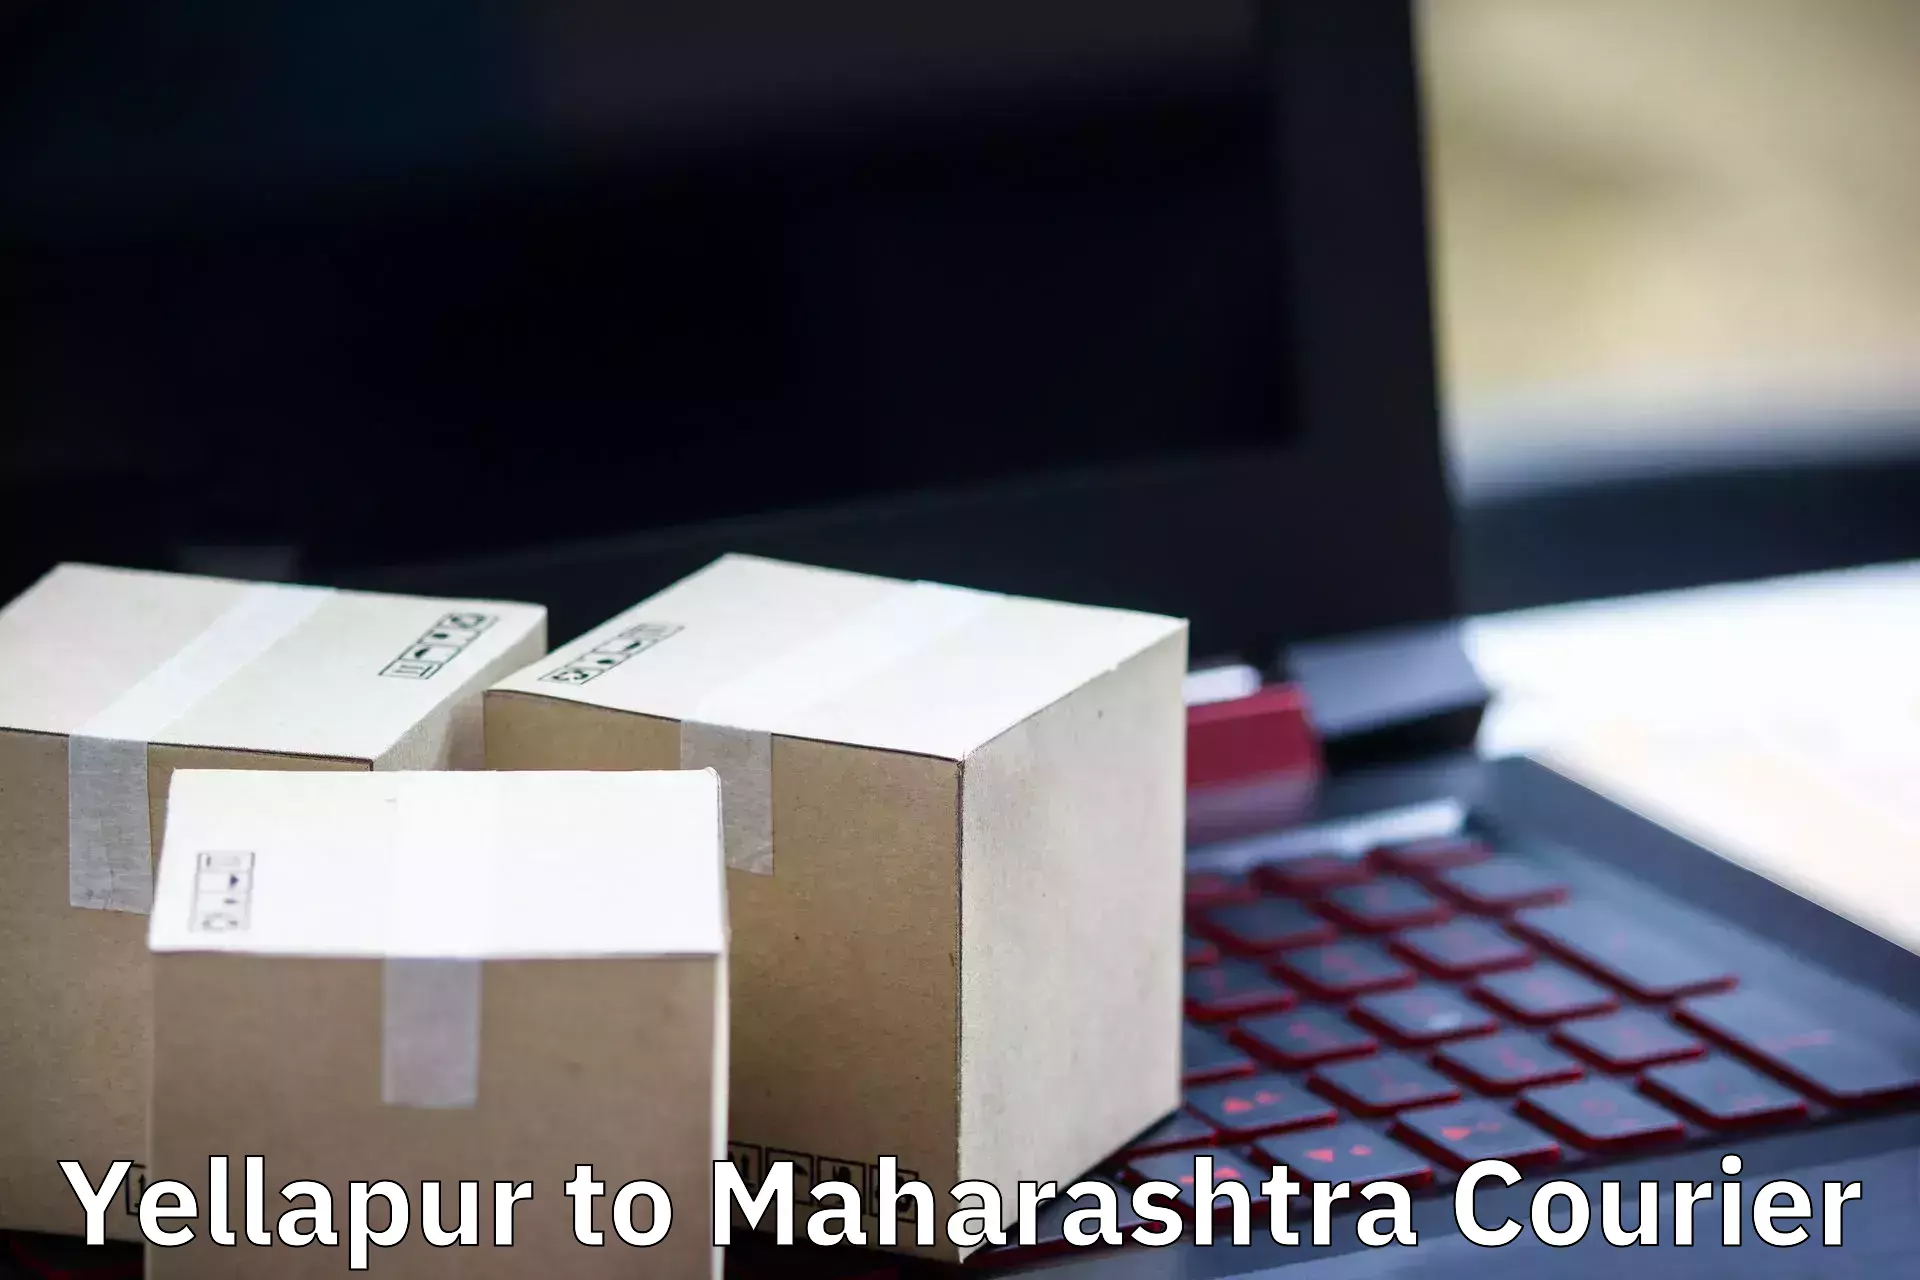 Quality moving and storage in Yellapur to Gondpipri